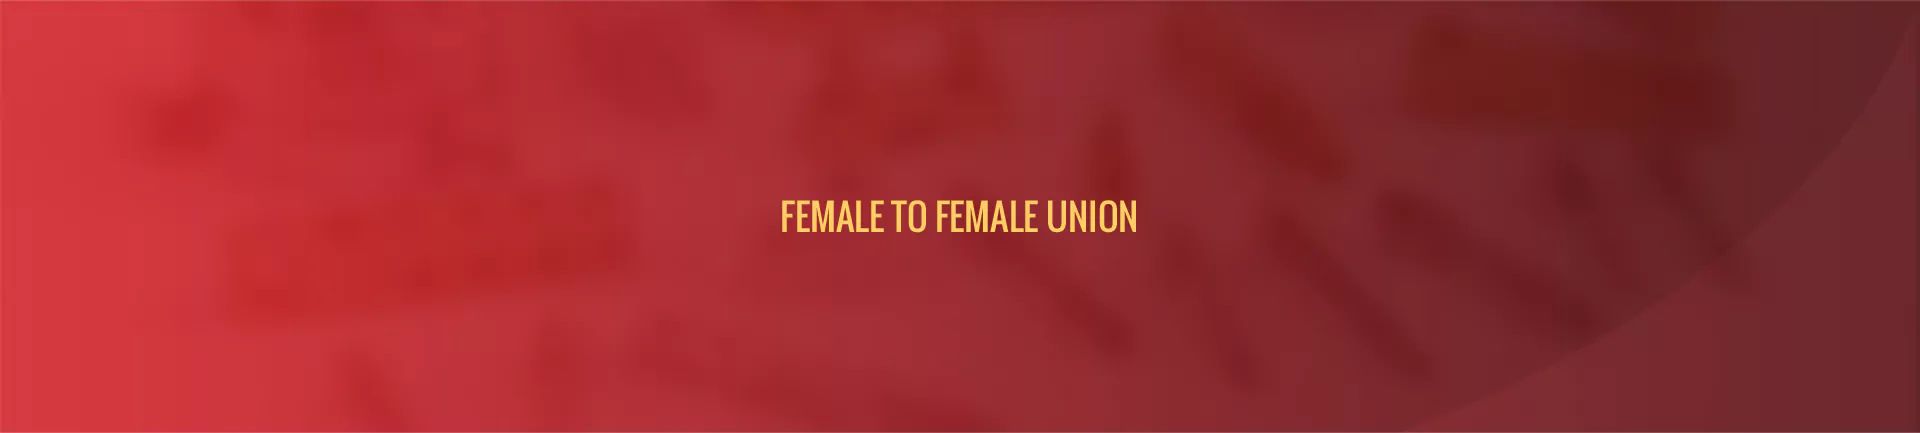 female_to_female_union-banner